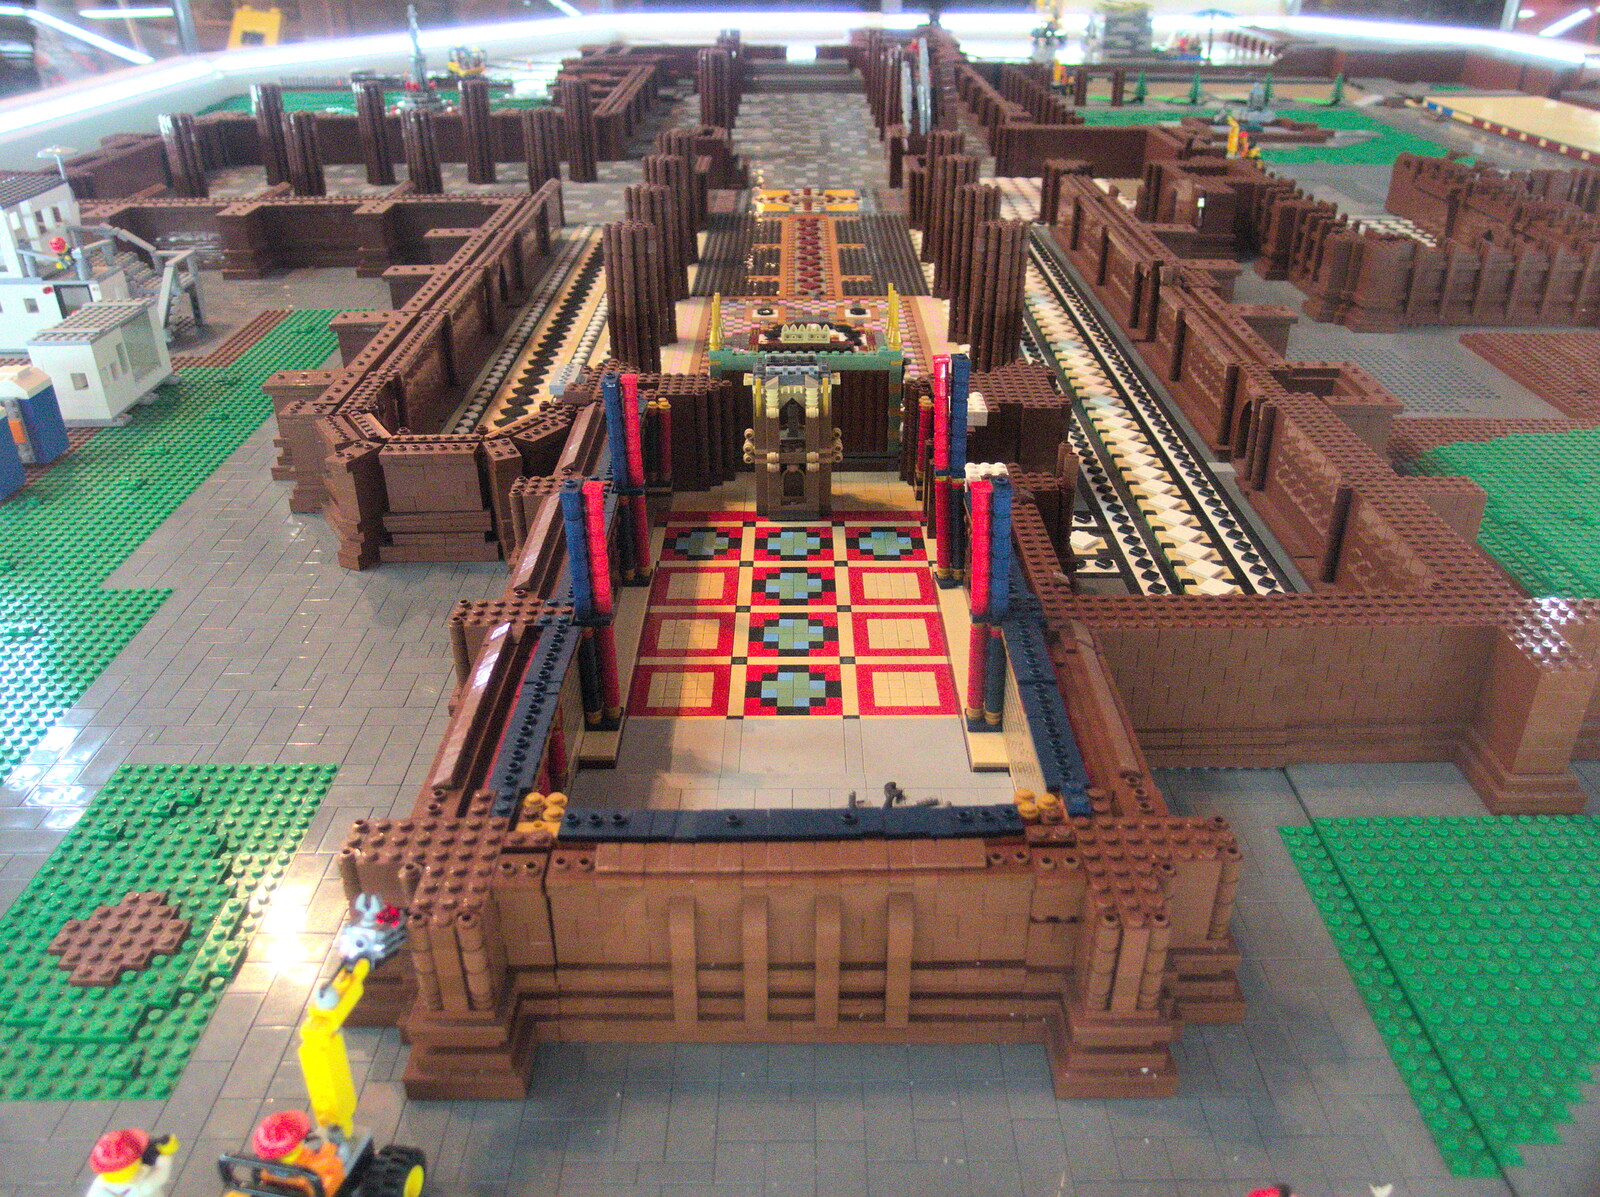 The Lego Chester Cathedral from A Party and a Road Trip to Chester, Suffolk and Cheshire - 20th December 2015